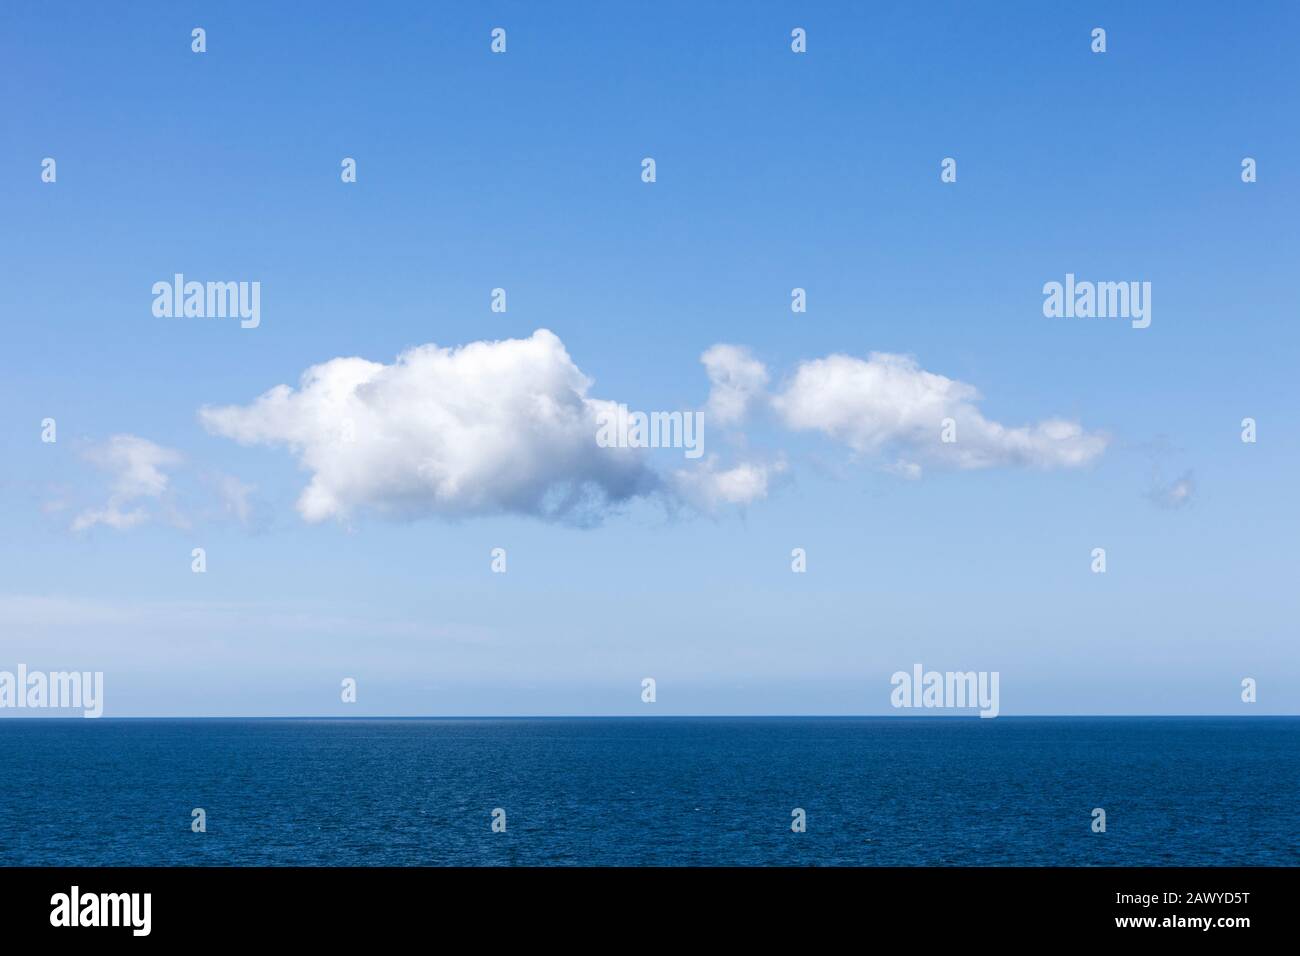 Cumulus clouds forming in a clear blue sky over a calm ocean horizon Stock Photo